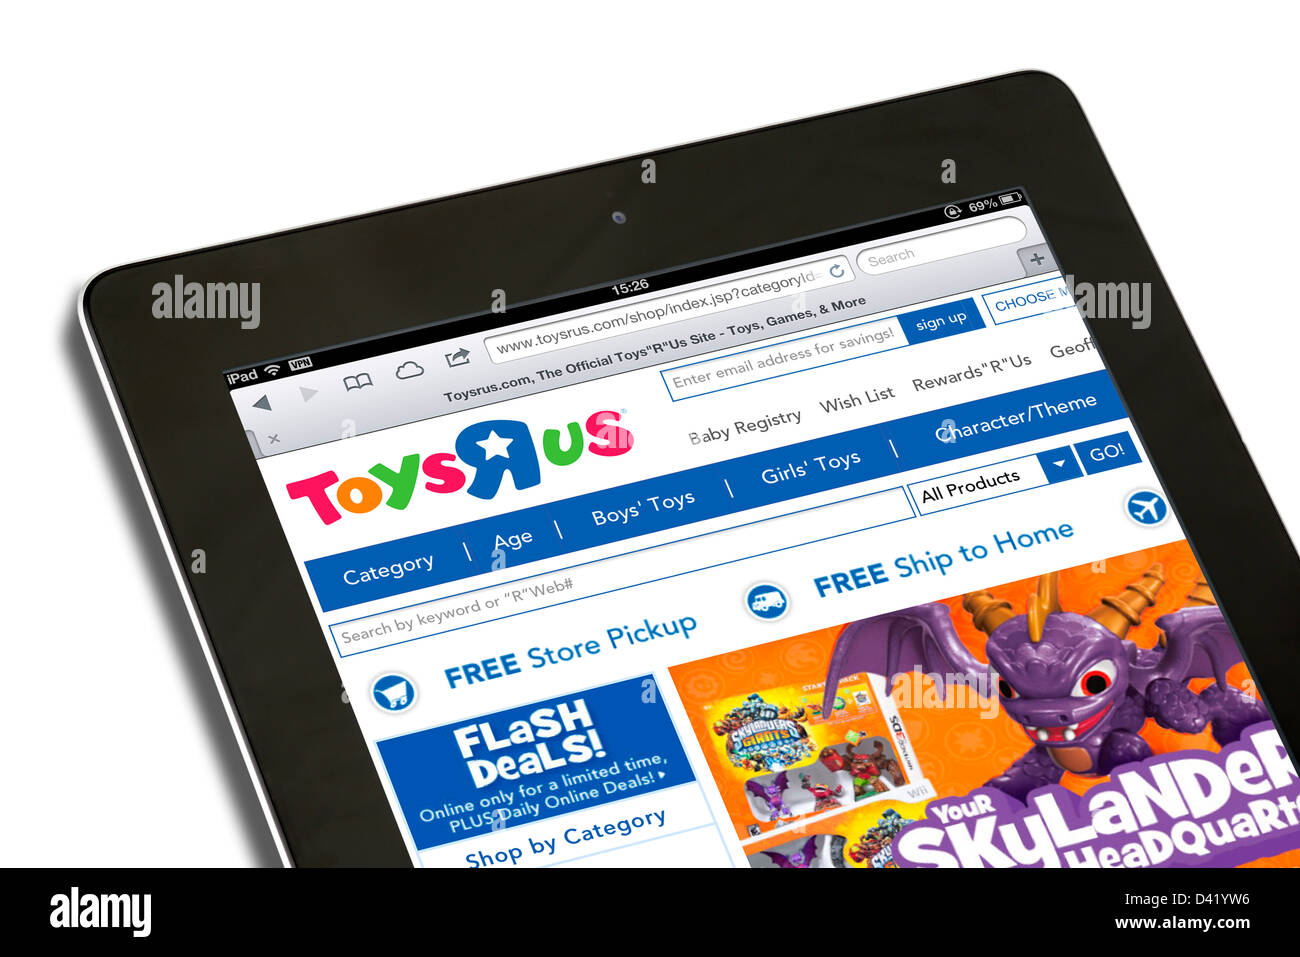 The Toys 'R' Us website viewed on an iPad 4, USA Stock Photo